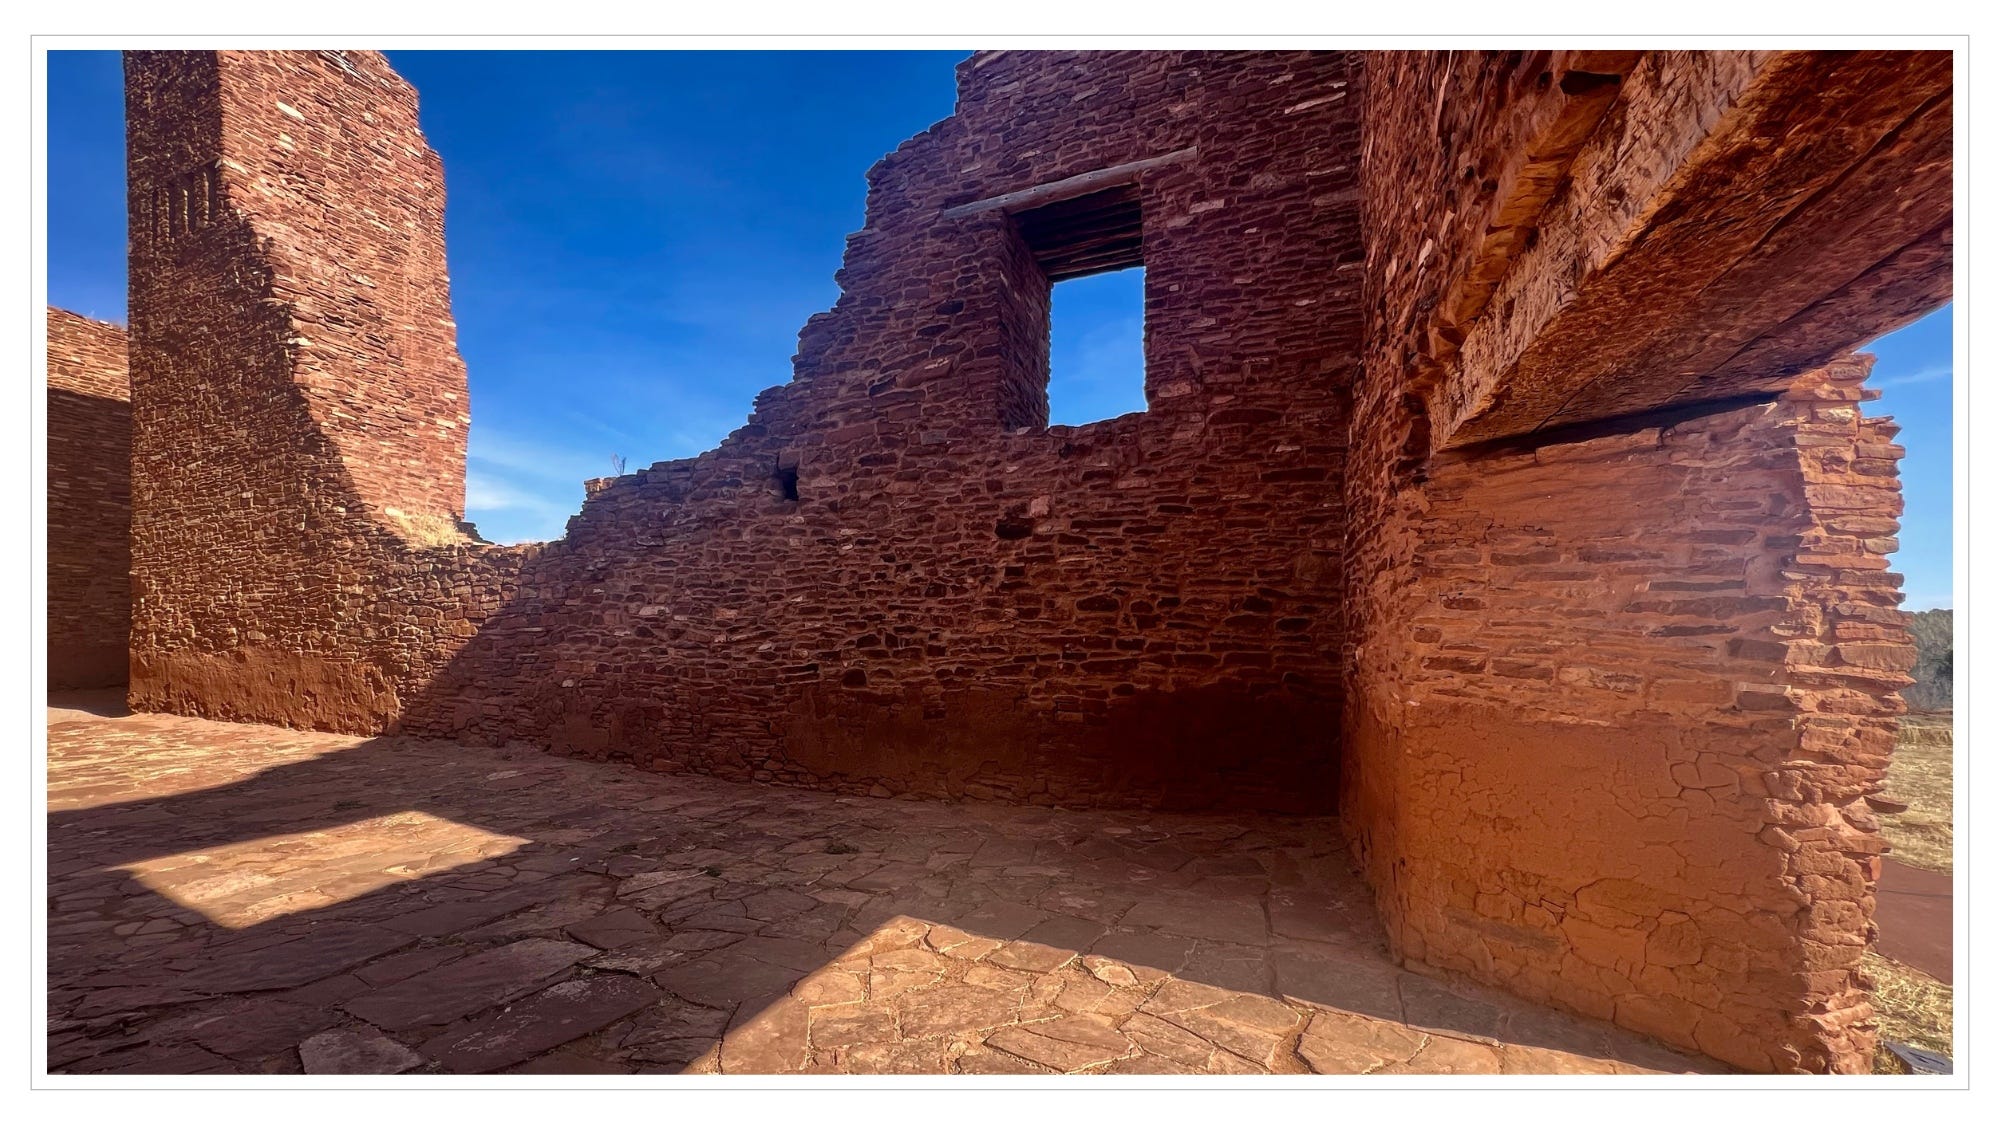 Spanish Mission Ruins, much later architecture than the image above (New Mexico)